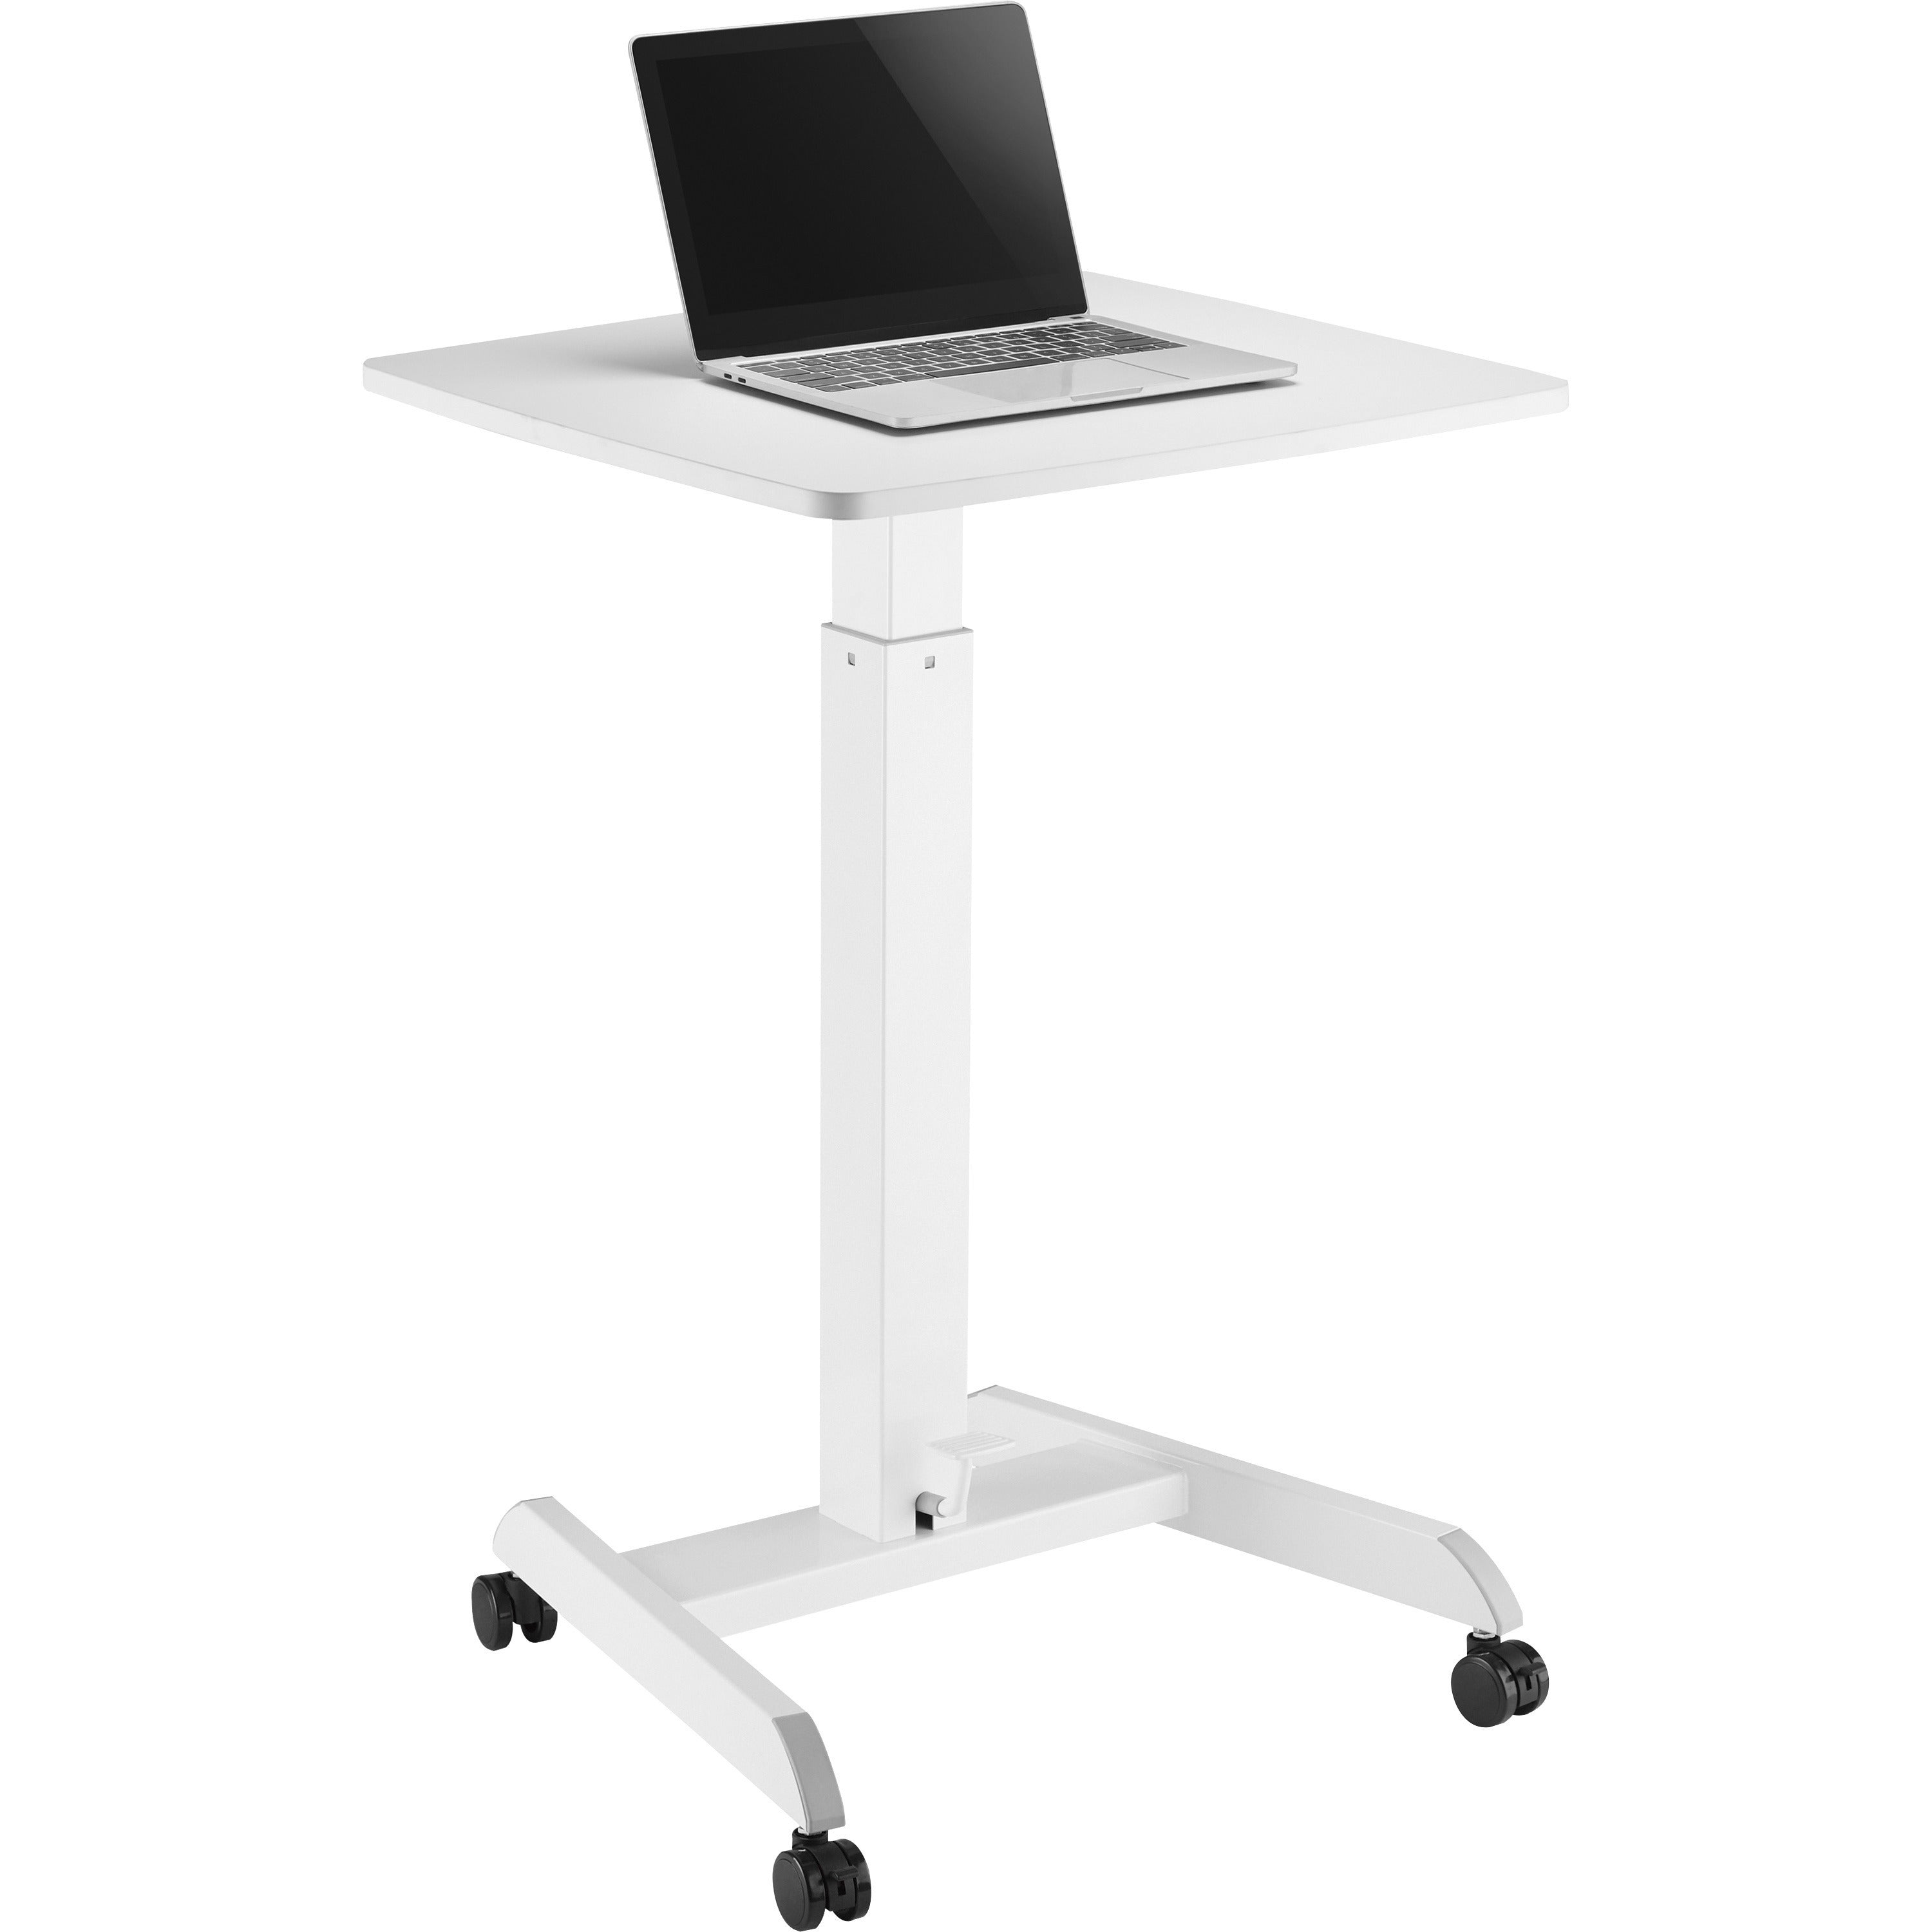 kantek-mobile-height-adjustable-sit-to-stand-desk-for-table-toprectangle-top-1760-lb-capacity-adjustable-height-2960-to-4420-adjustment-x-2360-table-top-width-x-2050-table-top-depth-4420-height-x-2360-width-x-2050-depth-a_ktksts300w - 2